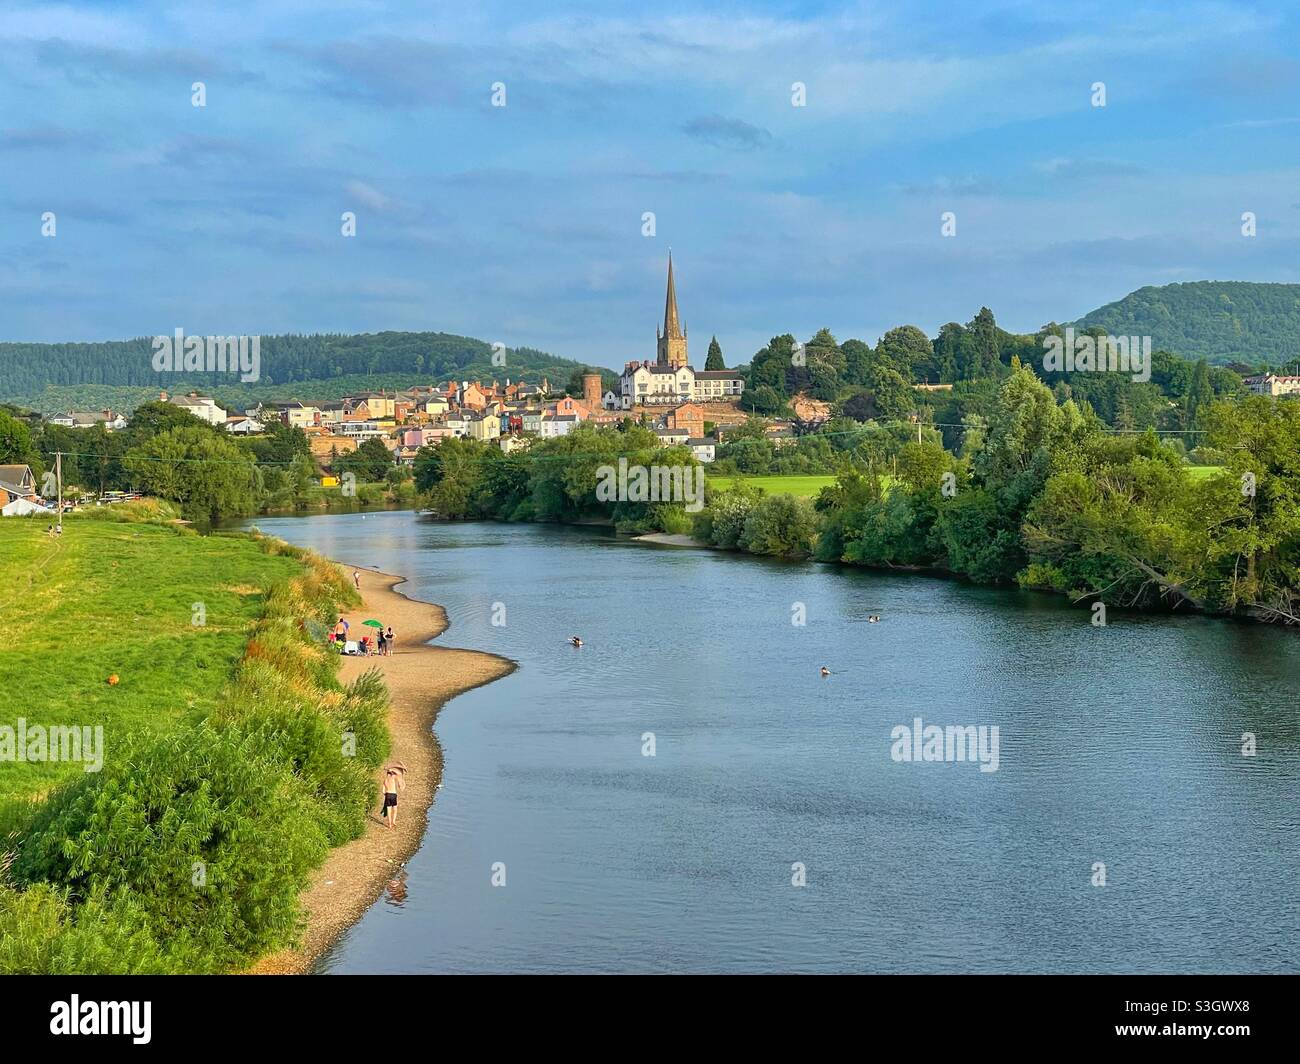 Ross on Wye as seen from the M50 road. Stock Photo